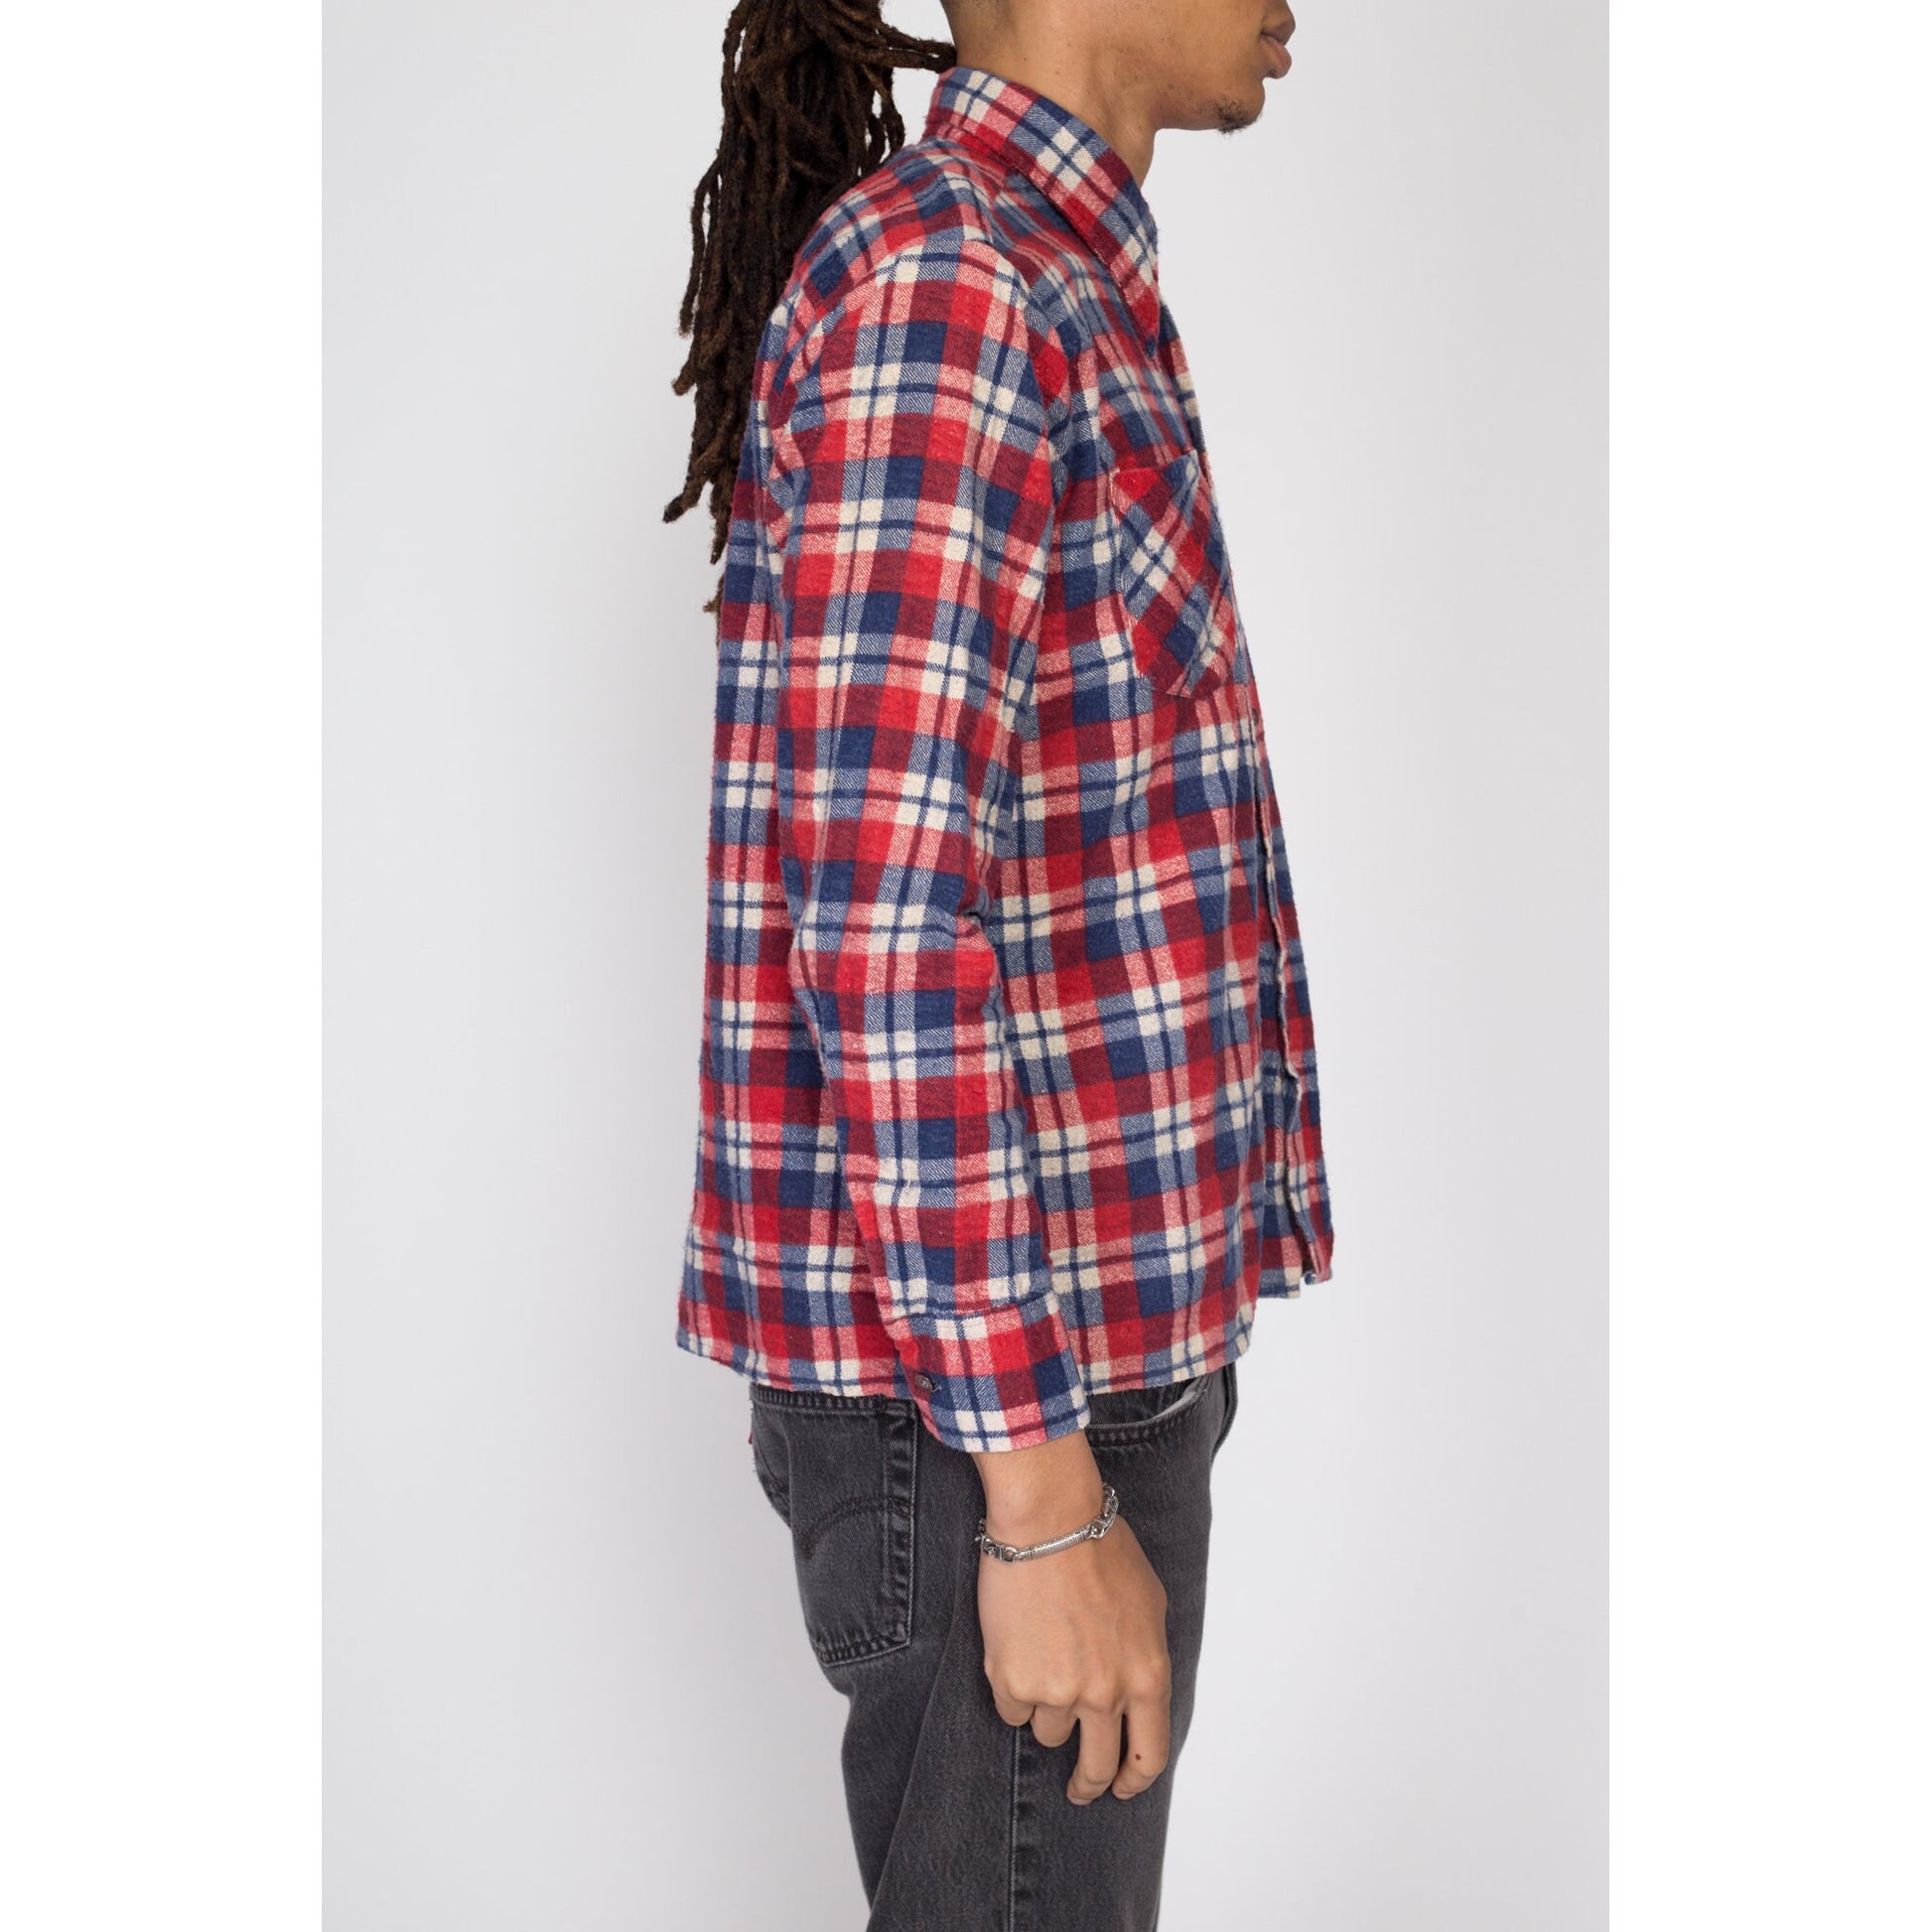 Medium 80s Red & Blue Plaid Flannel Shirt l | Vintage Grunge Button Up Long Sleeve Collared Top